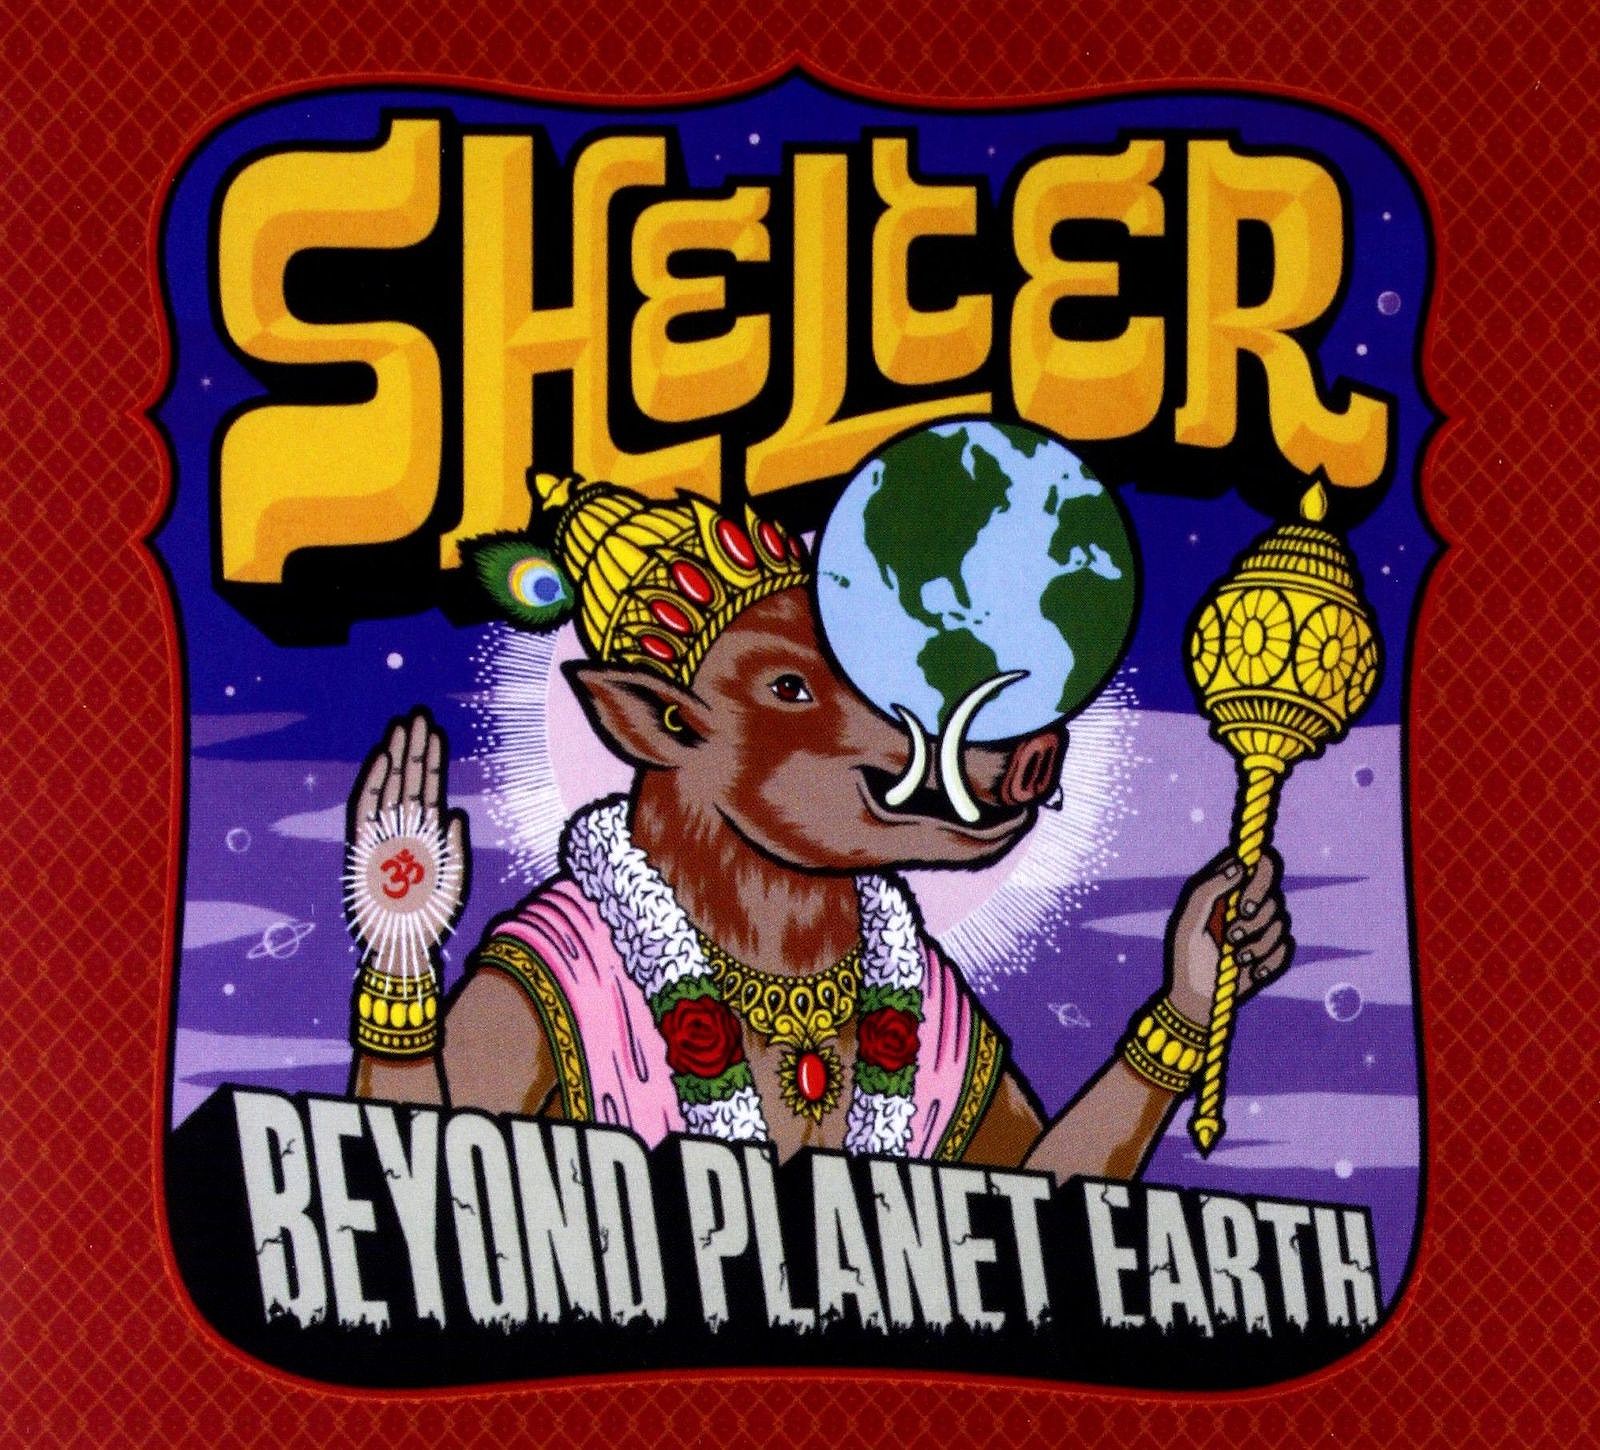 Shelter Beyond Planet Earth